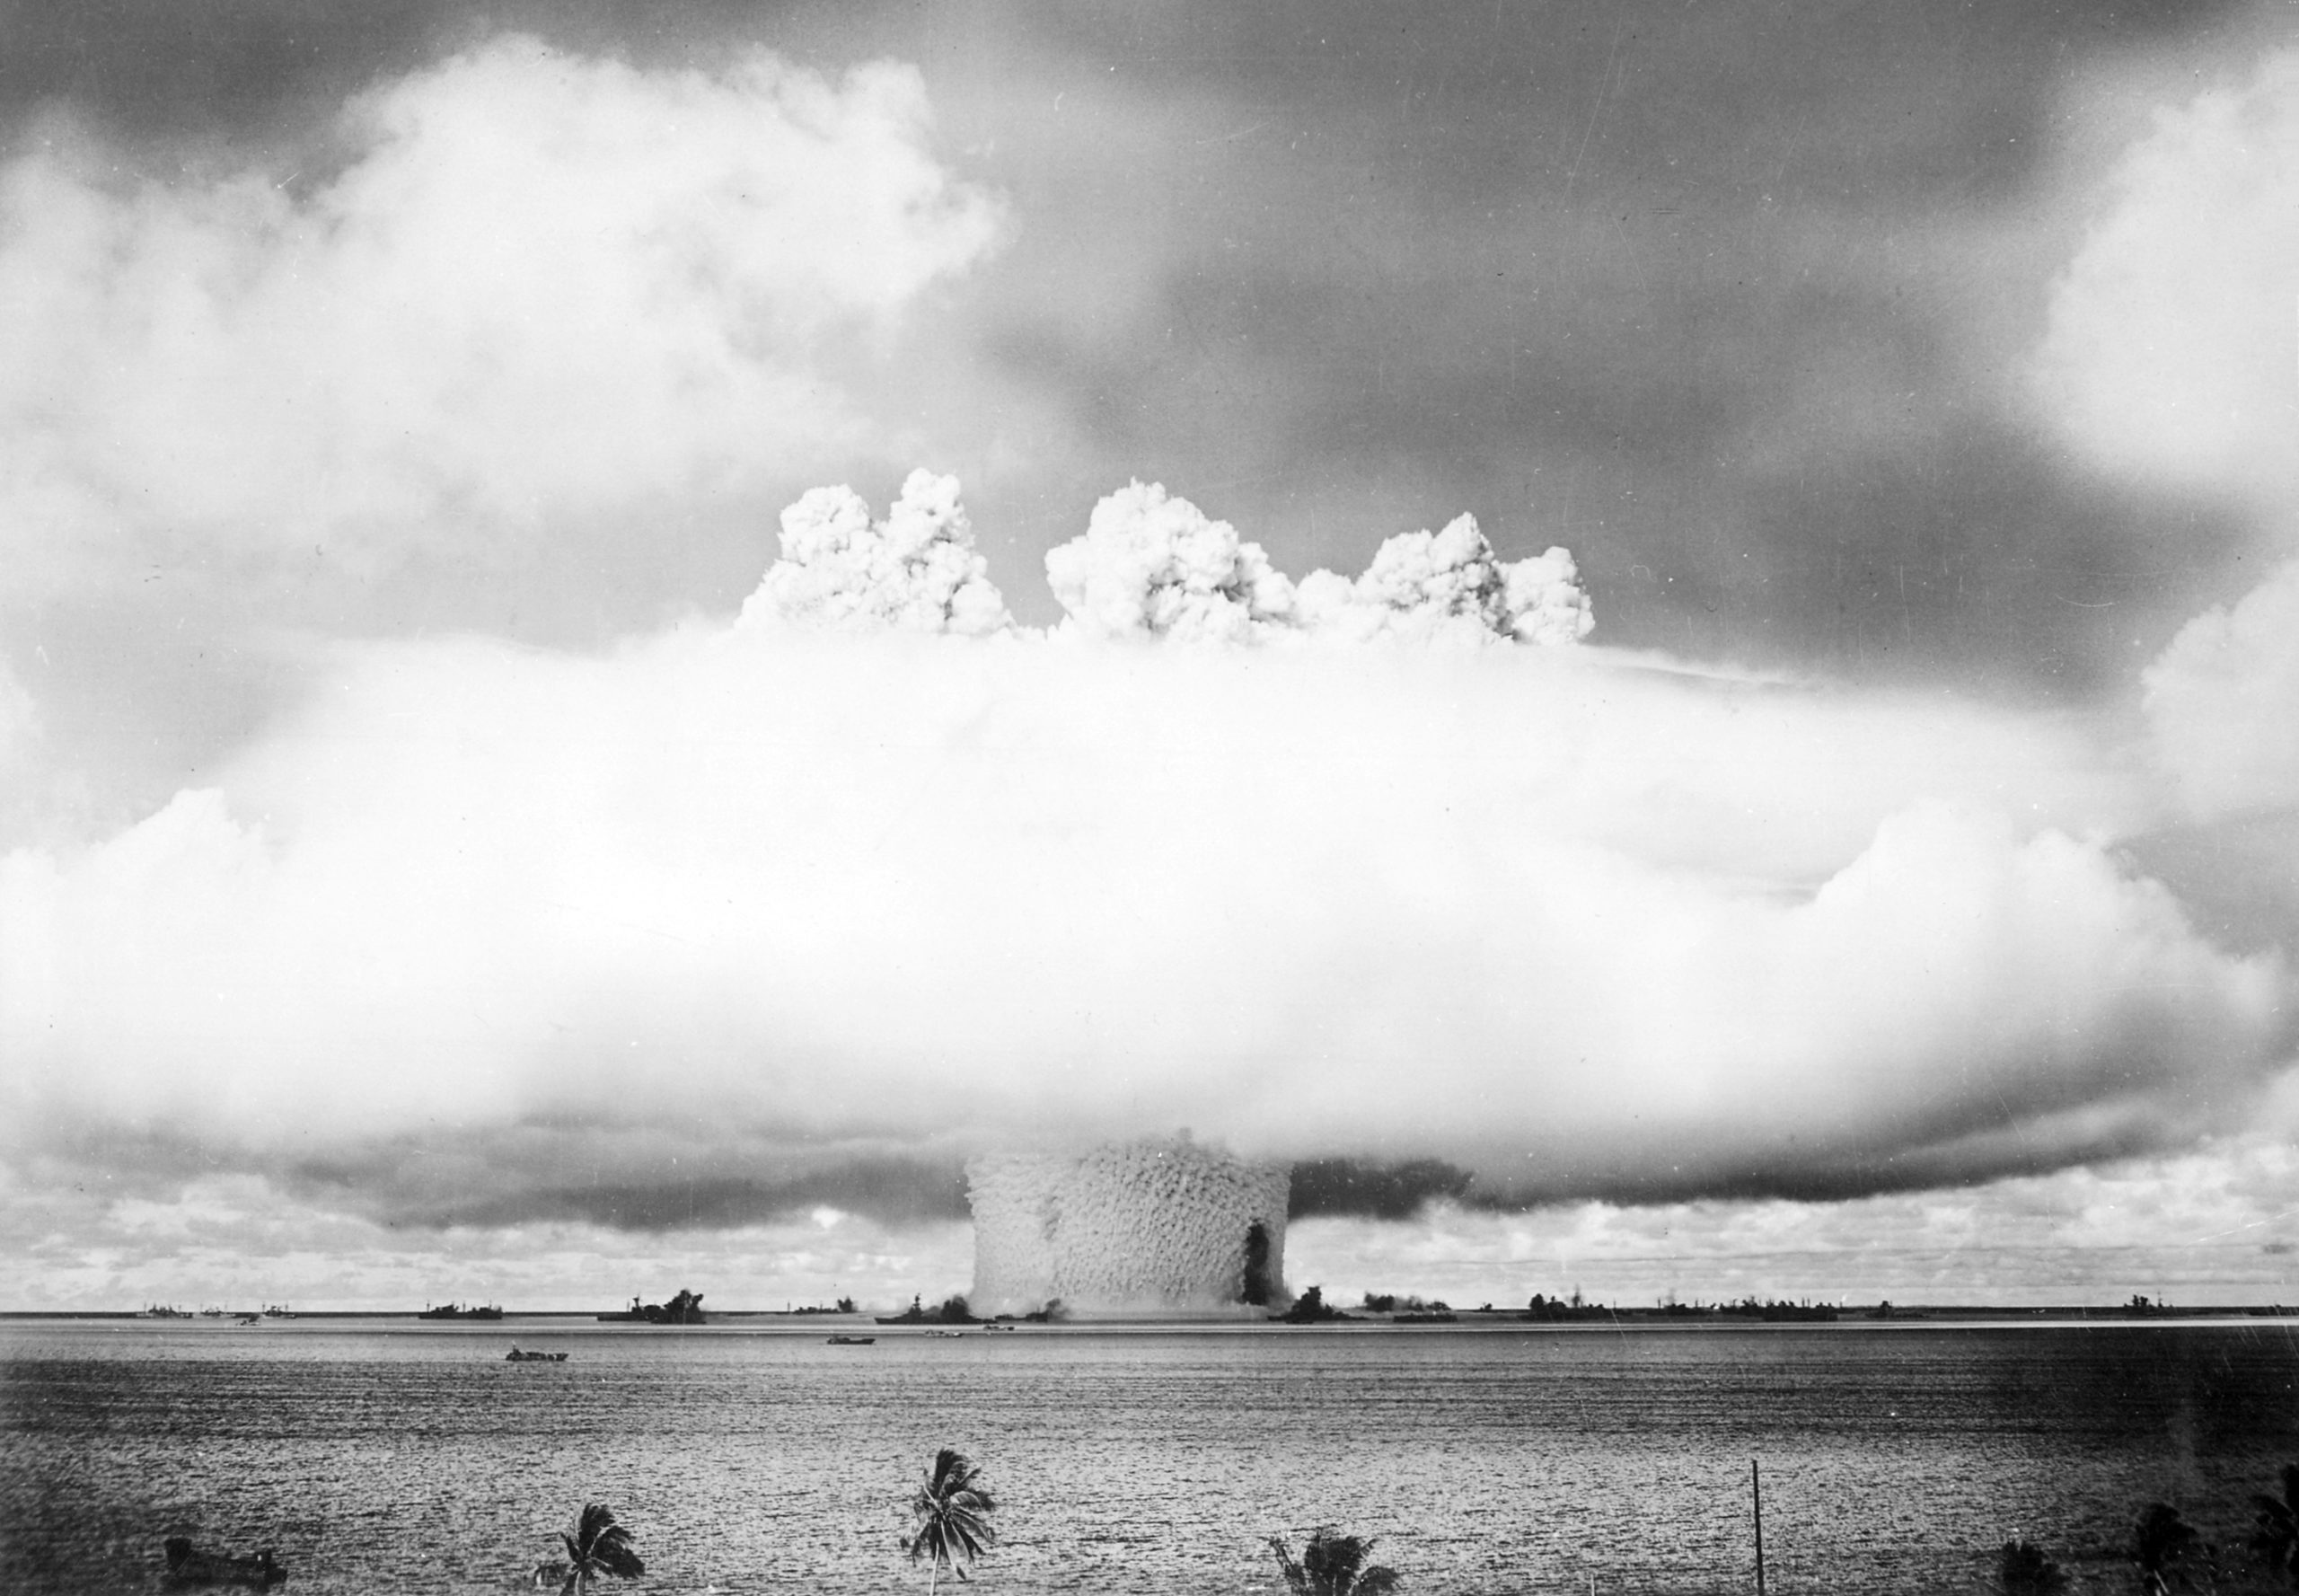 The atomic cloud during the "Baker" nuclear test at Bikini atoll.